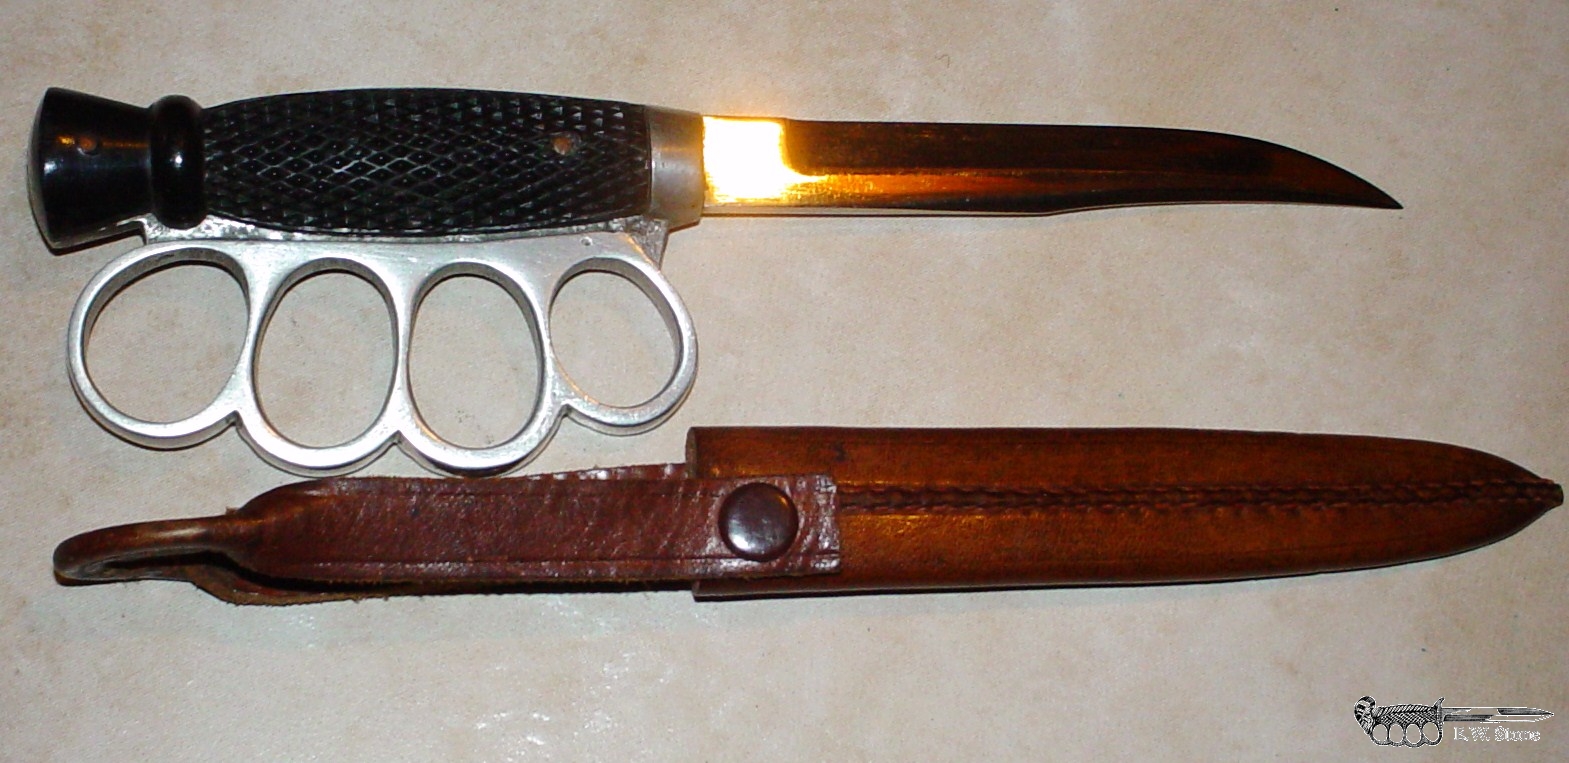 Unmarked British Knuckle Knife Type attributed to Several Makers.